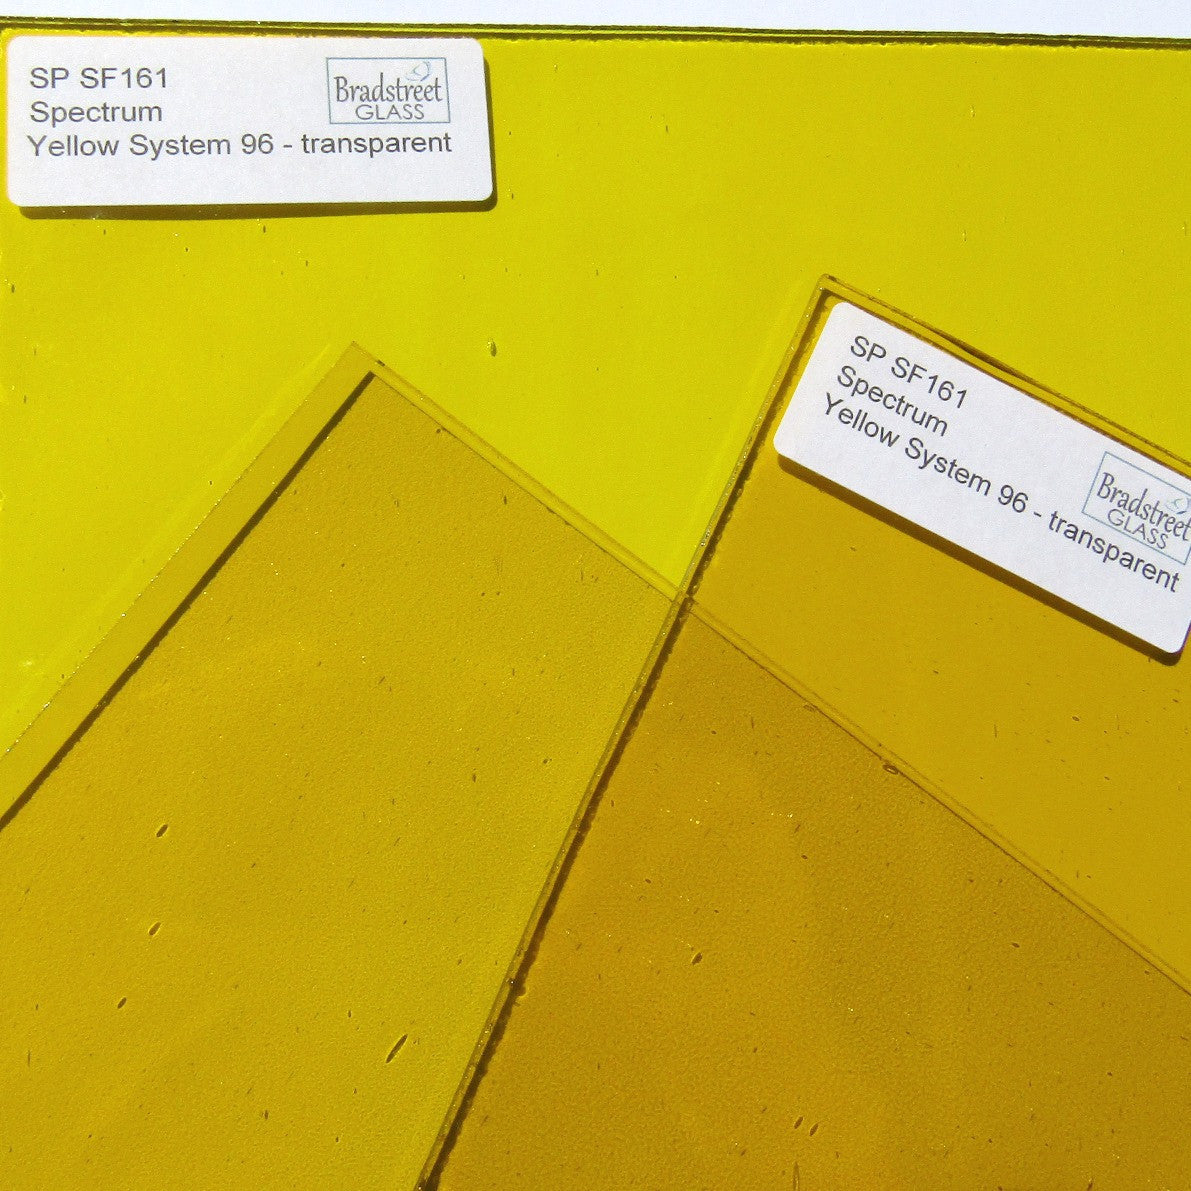 Fusible Yellow Stained Glass Sheet Transparent 96 COE Translucent Spectrum System 96 SF161